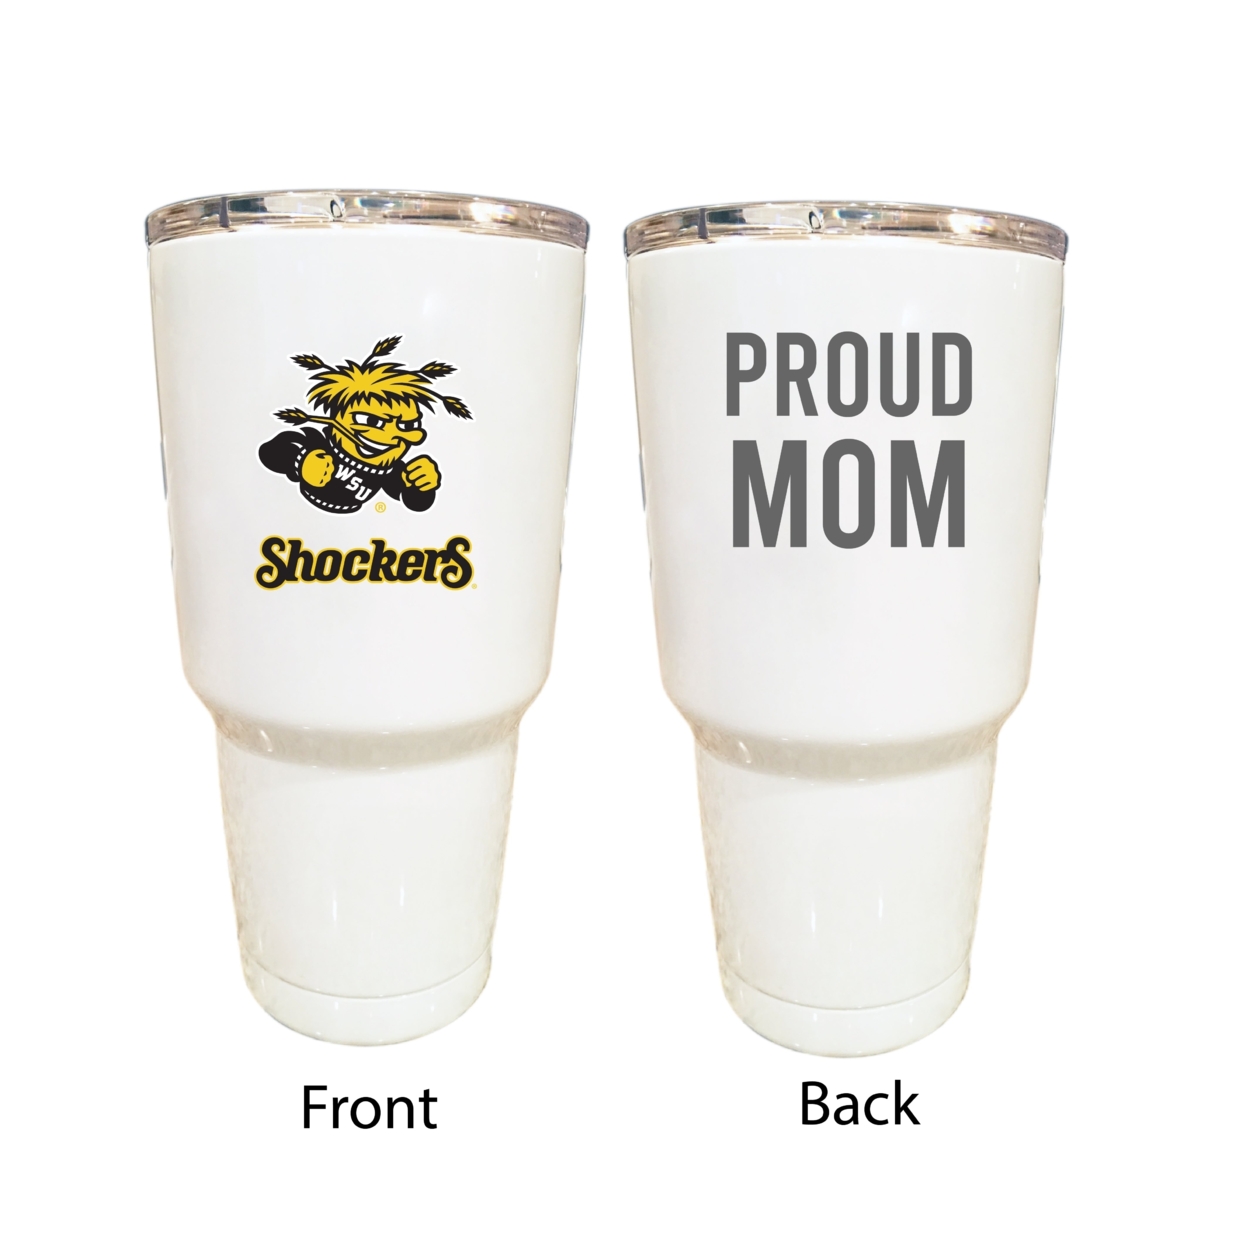 Wichita State Shockers Proud Mom 24 Oz Insulated Stainless Steel Tumblers Choose Your Color. - White